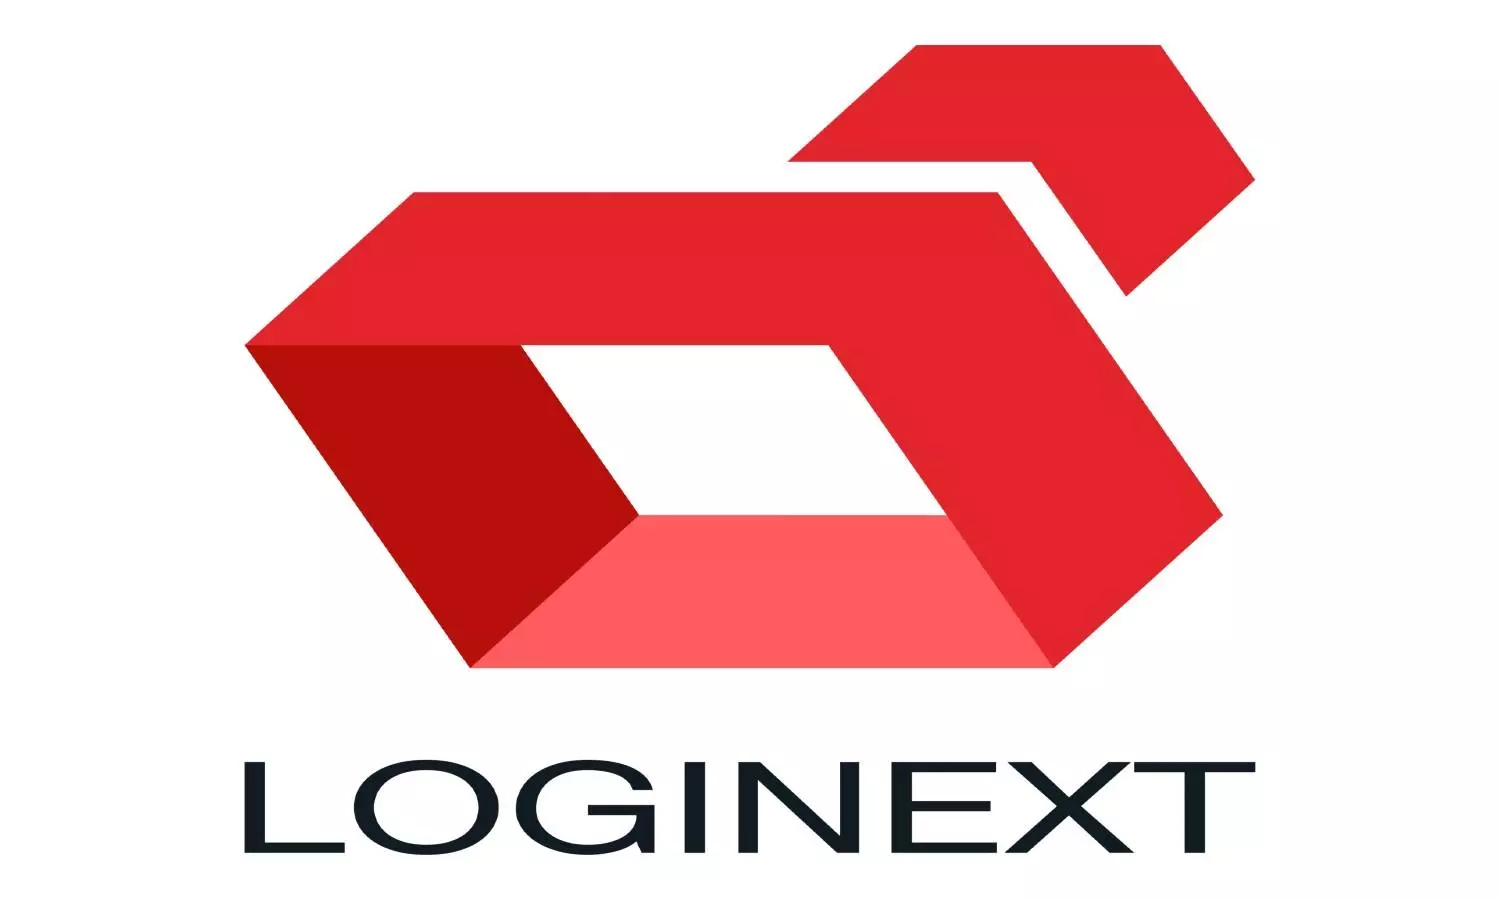 LogiNext launches fleet tracking system for safer truck deliveries